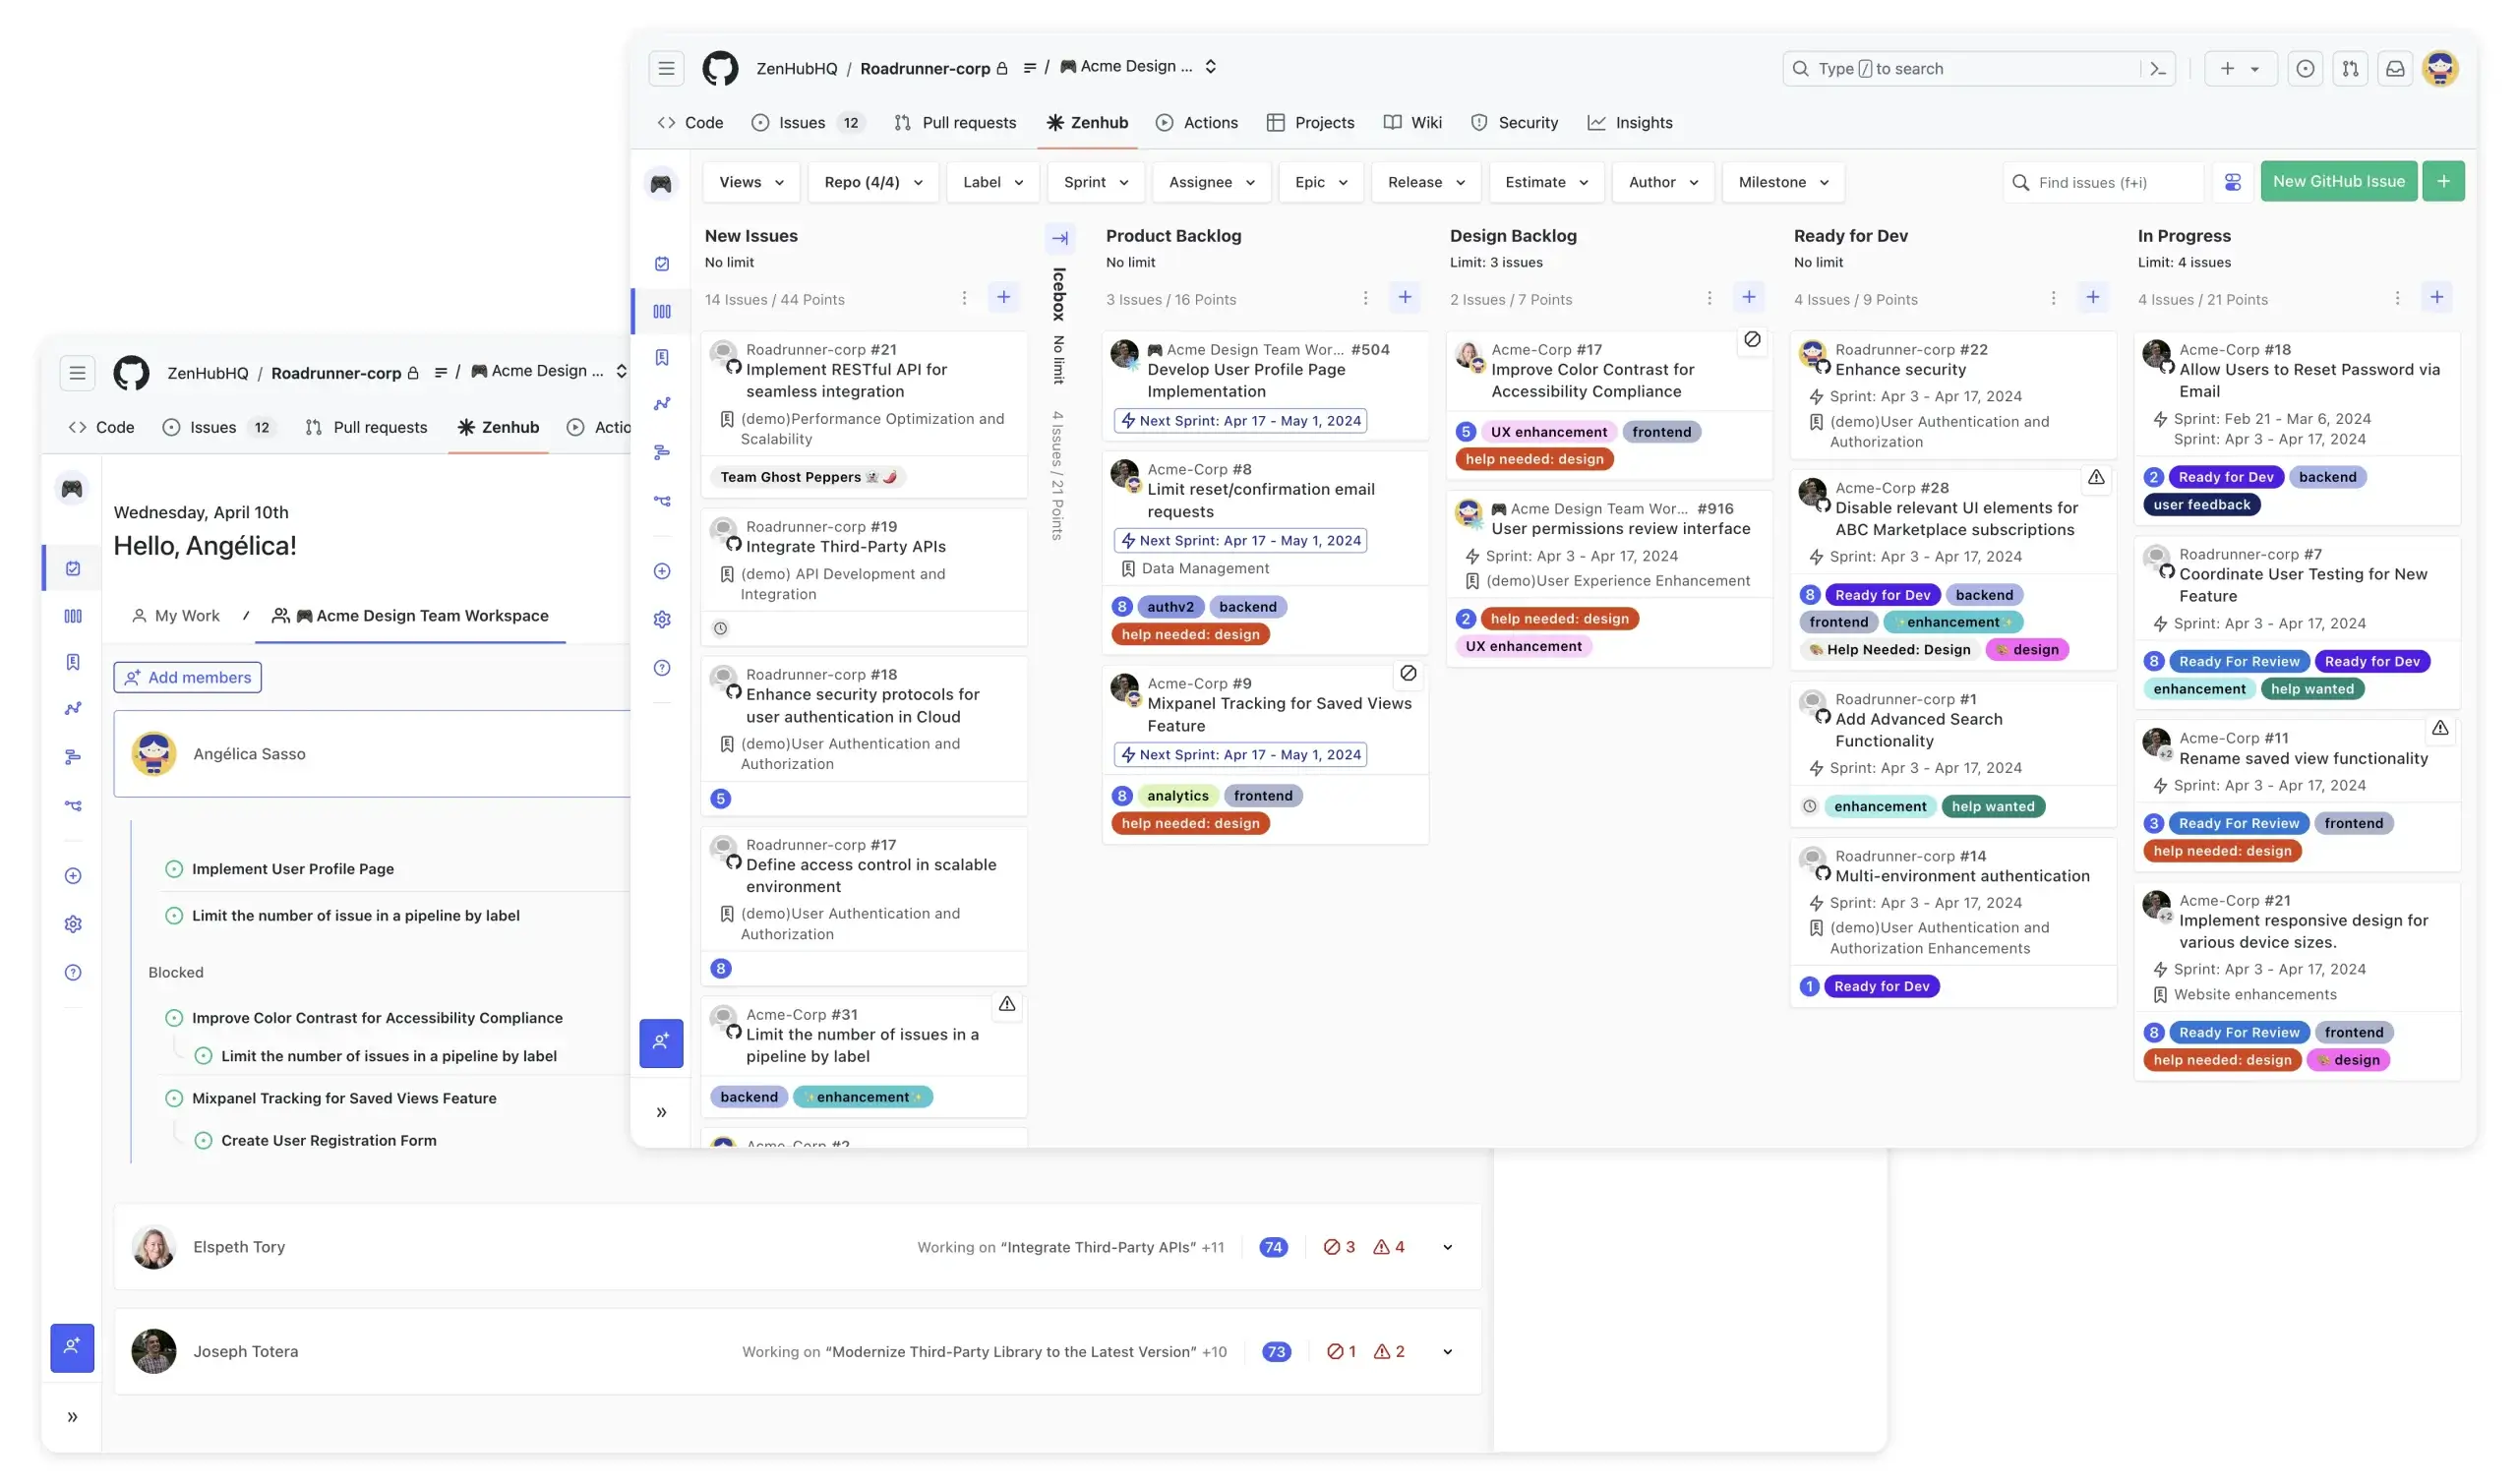 GitHub for project management